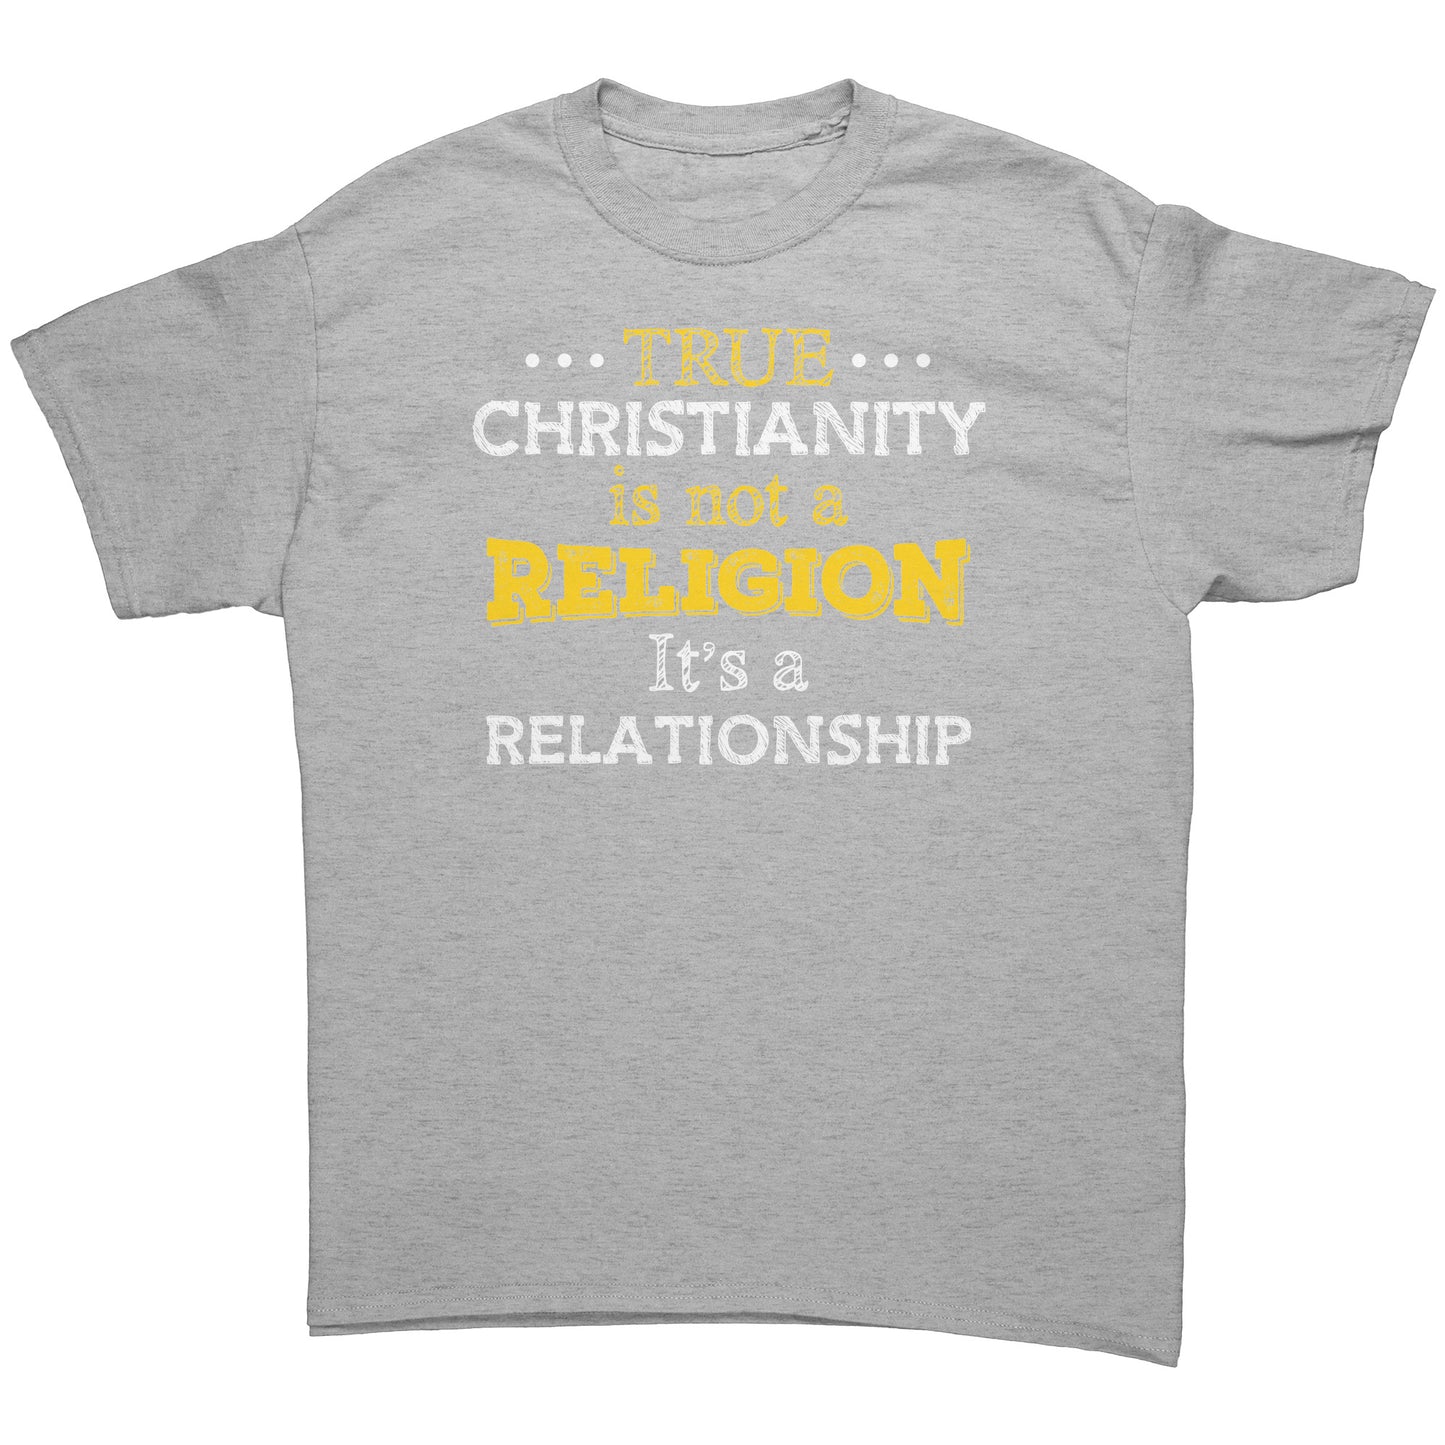 True Christianity Is Not A Religion But A Relationship Men's T-Shirt Part 1